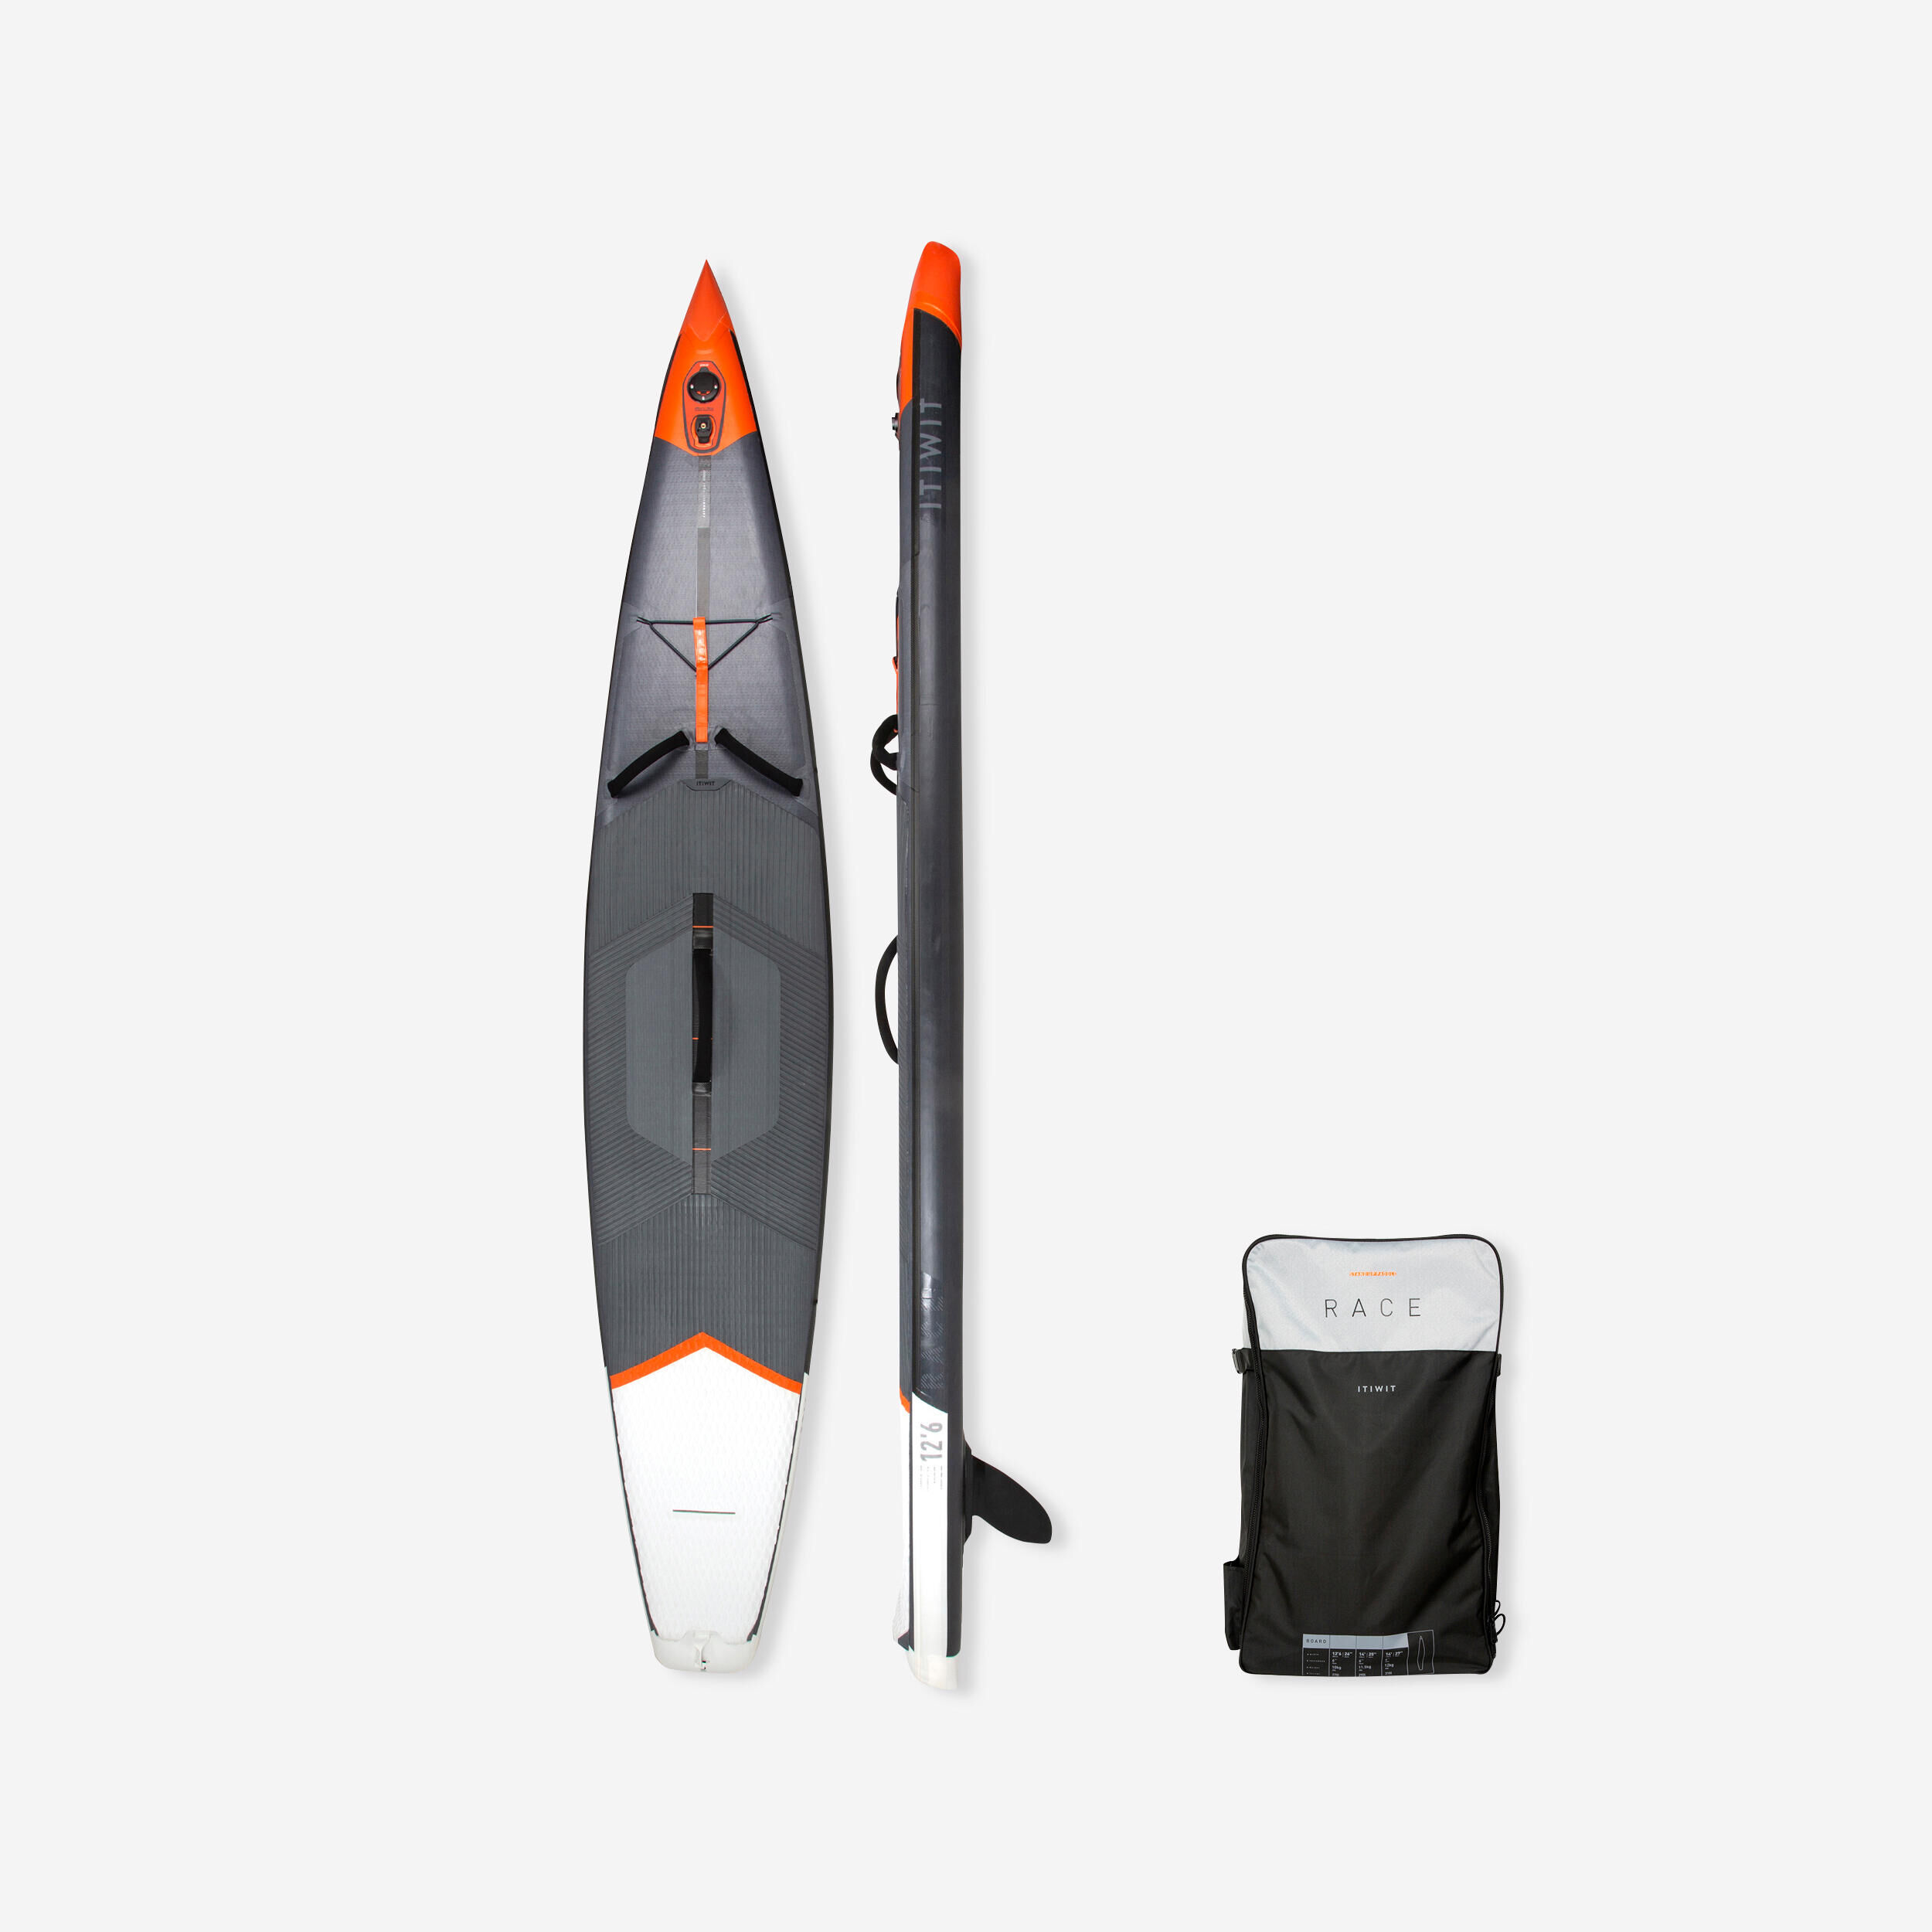 ITIWIT R500 12FT 6" / 26" RACING INFLATABLE STAND-UP PADDLEBOARD